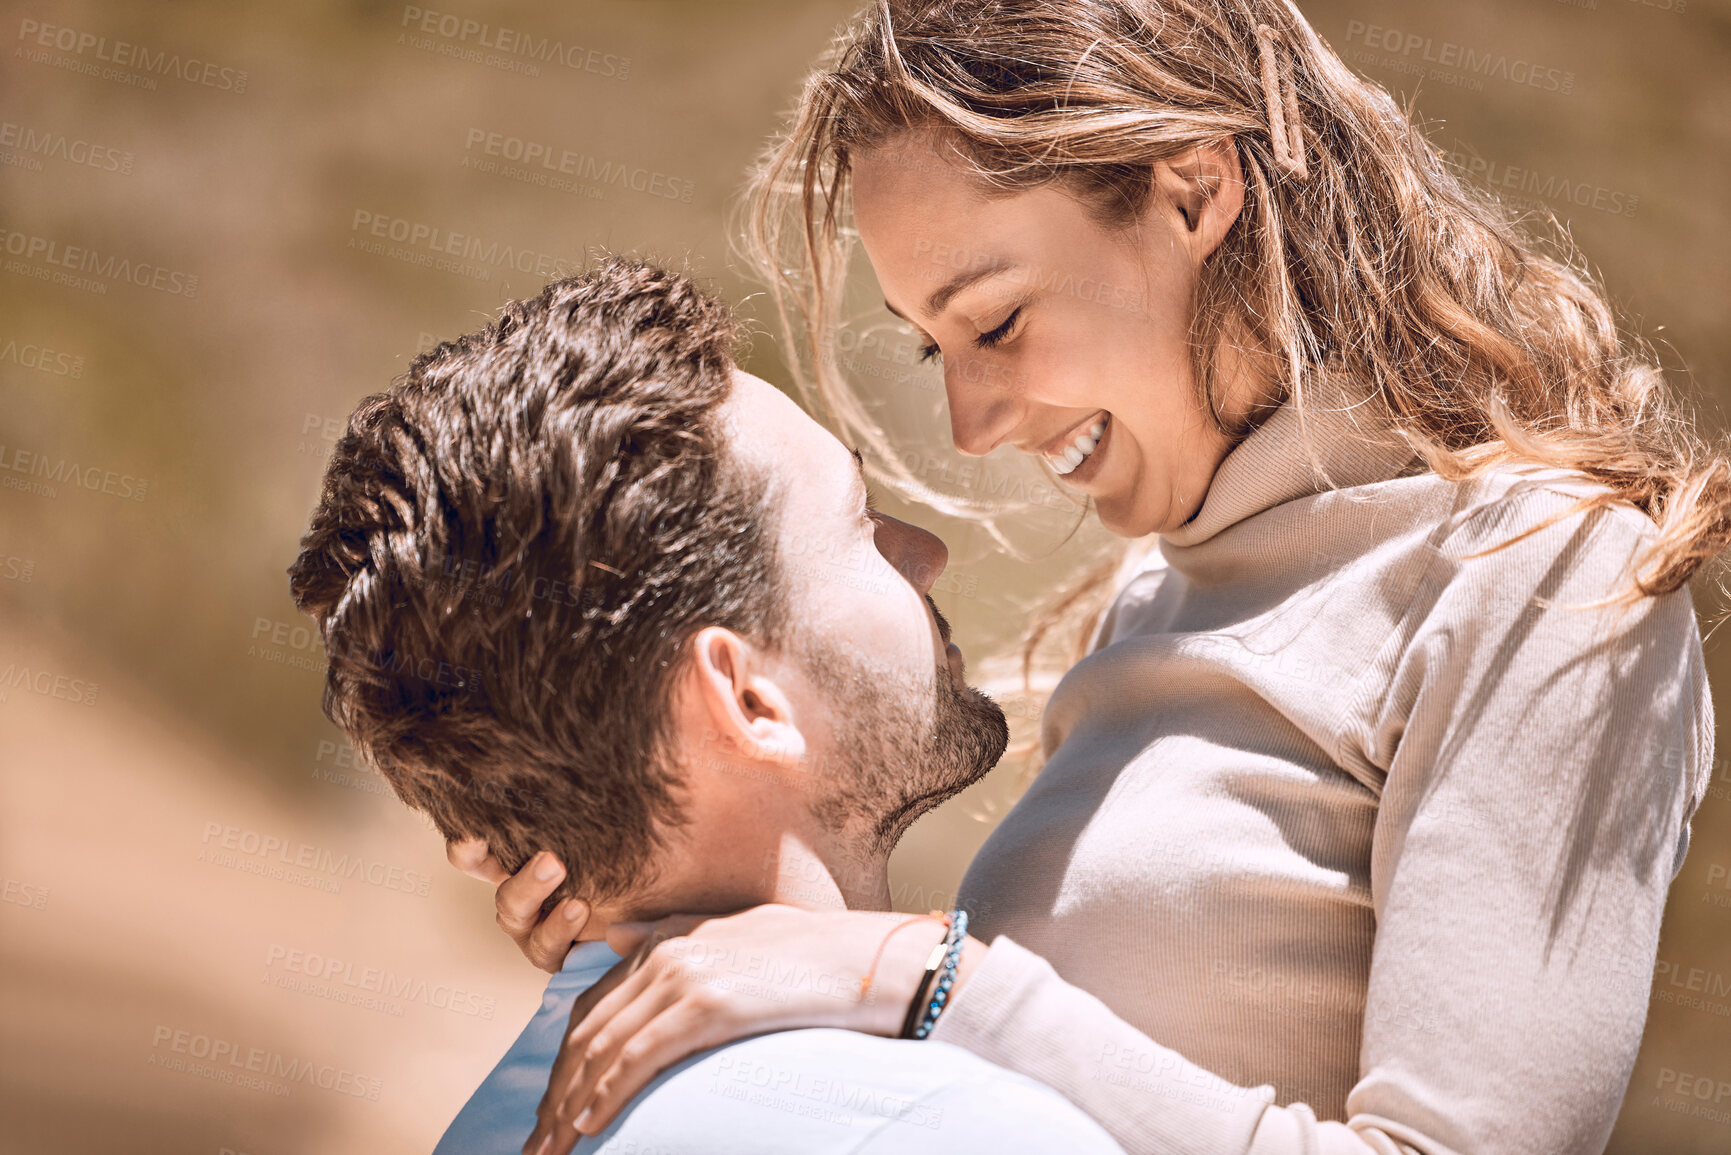 Buy stock photo Loving, affectionate and caring young couple bonding while enjoying the day outdoors in nature. Happy, in love and smiling man embracing his wife while holding her outside on a valley or hill.